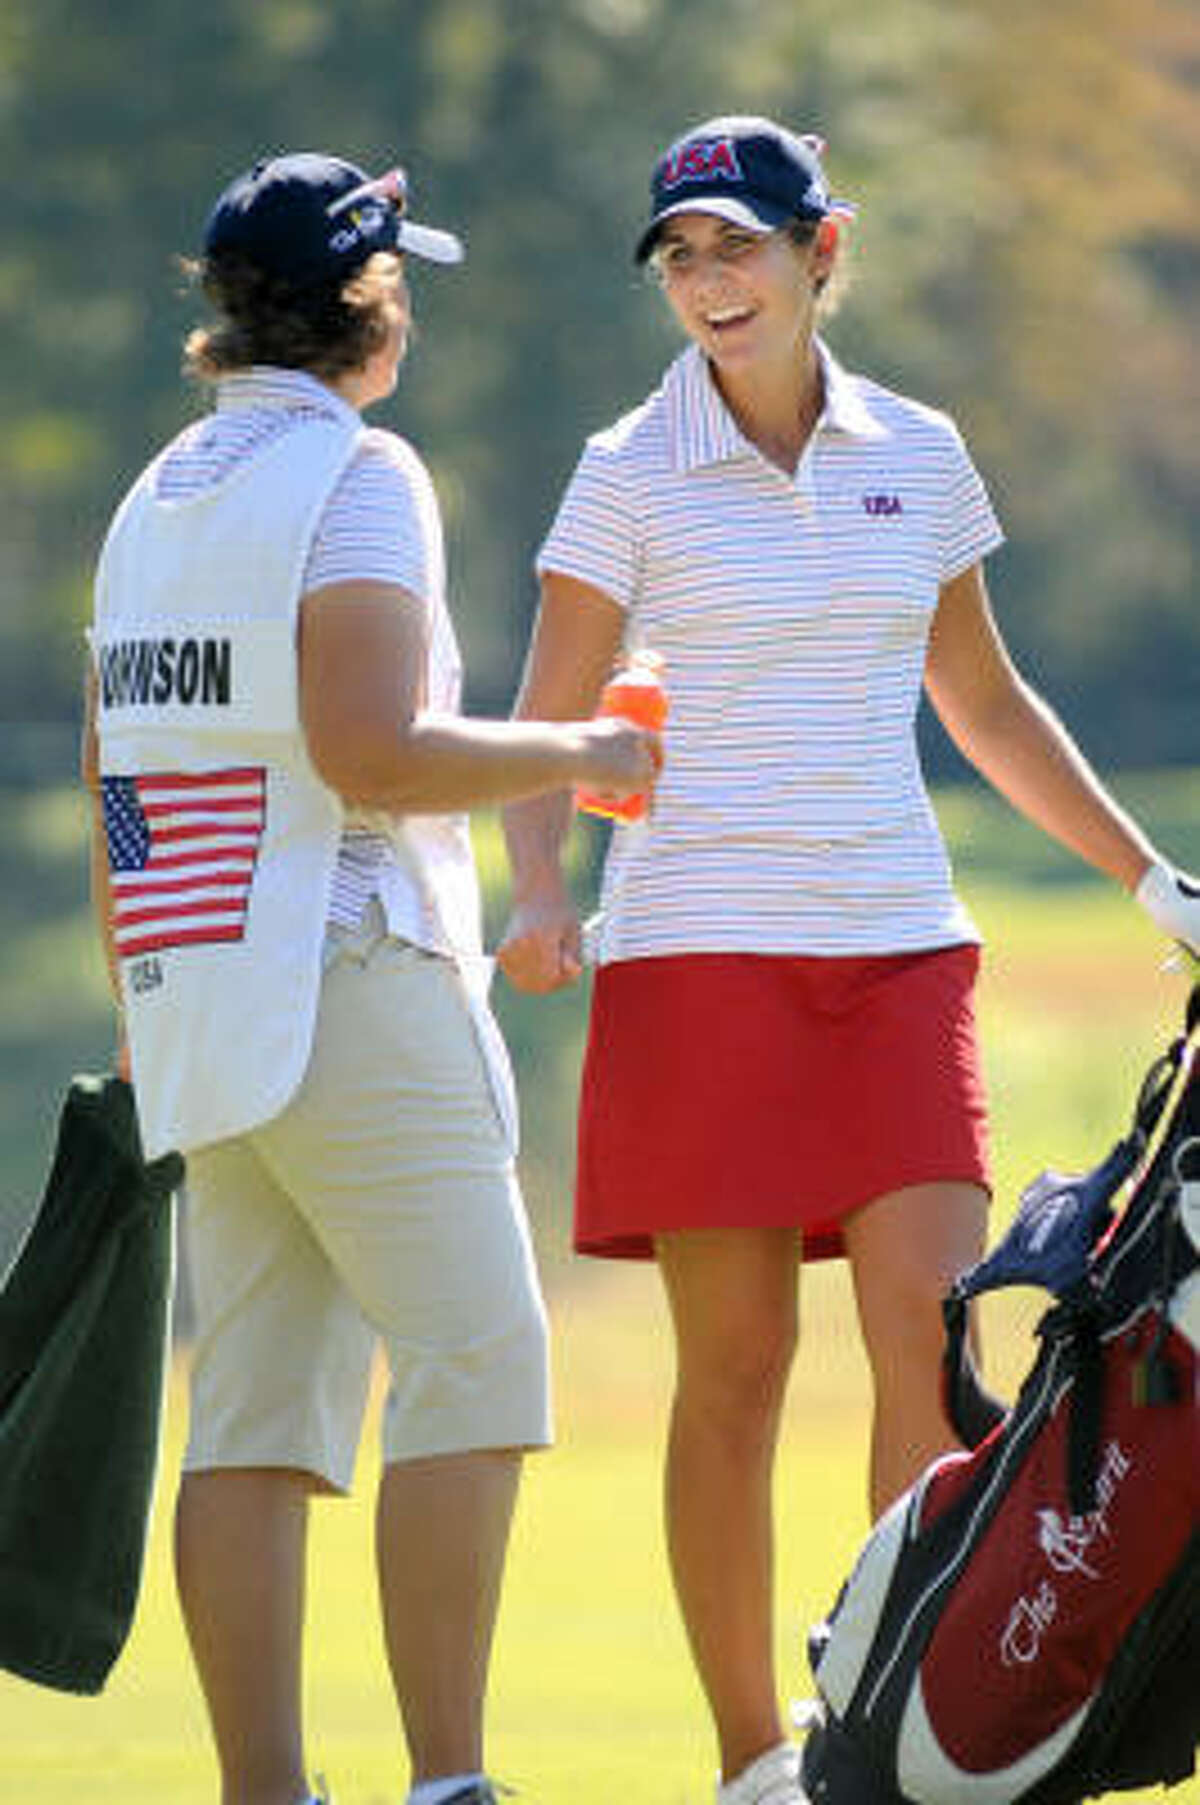 Jennifer Johnson, right,shares a laugh with her caddy, Alli Jarrett, while competing during the second round.